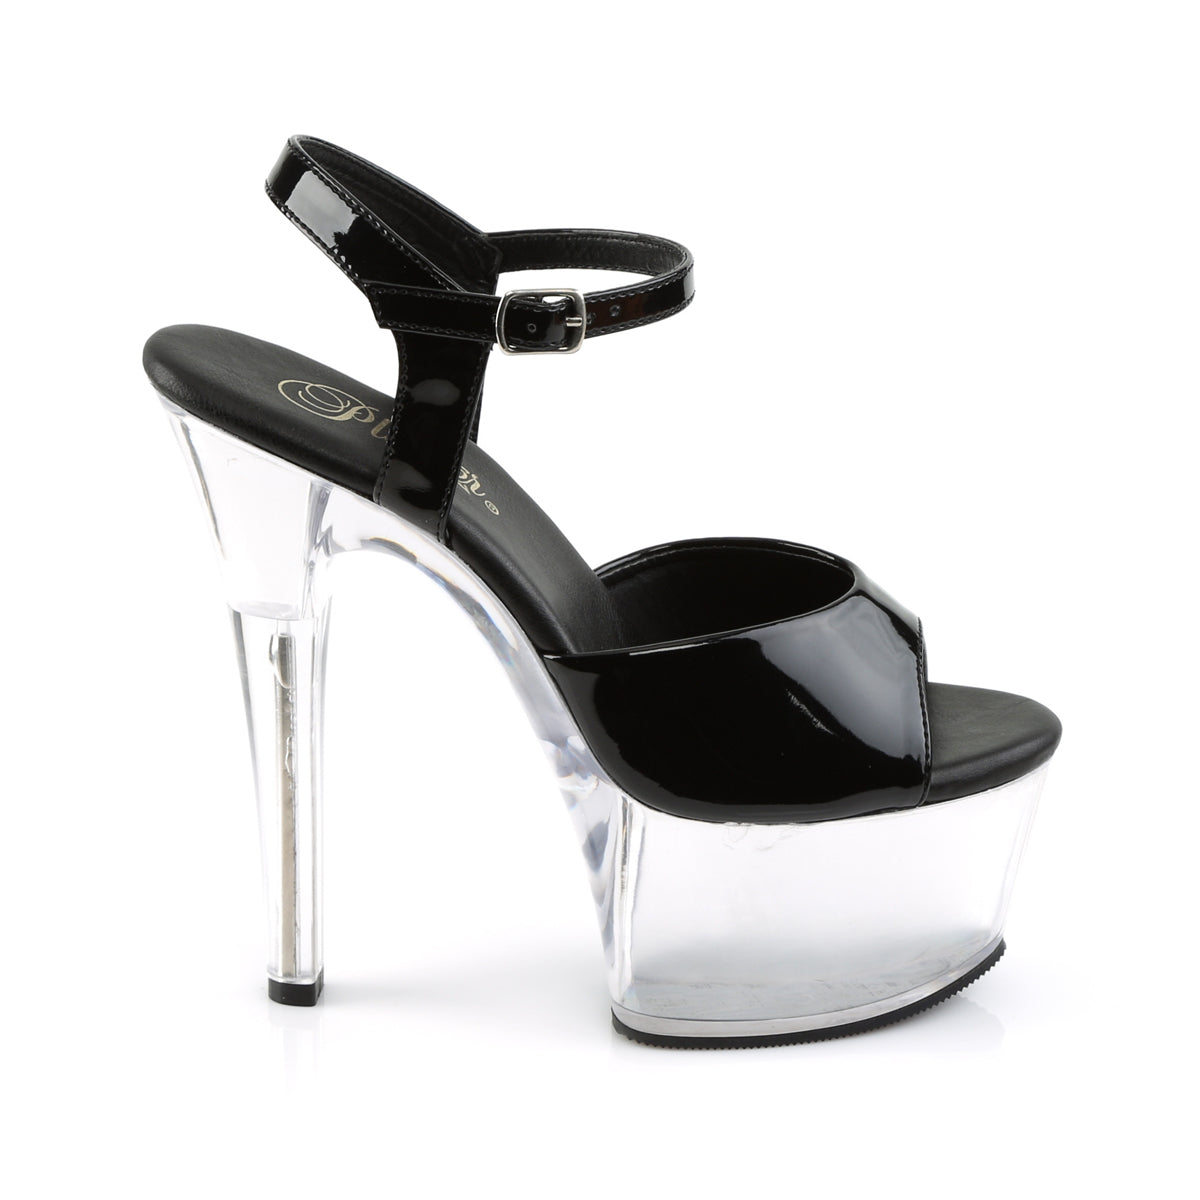 ASPIRE-609 Pleaser 6" Heel Black and Clear Pole Dancing Shoe-Pleaser- Sexy Shoes Fetish Heels